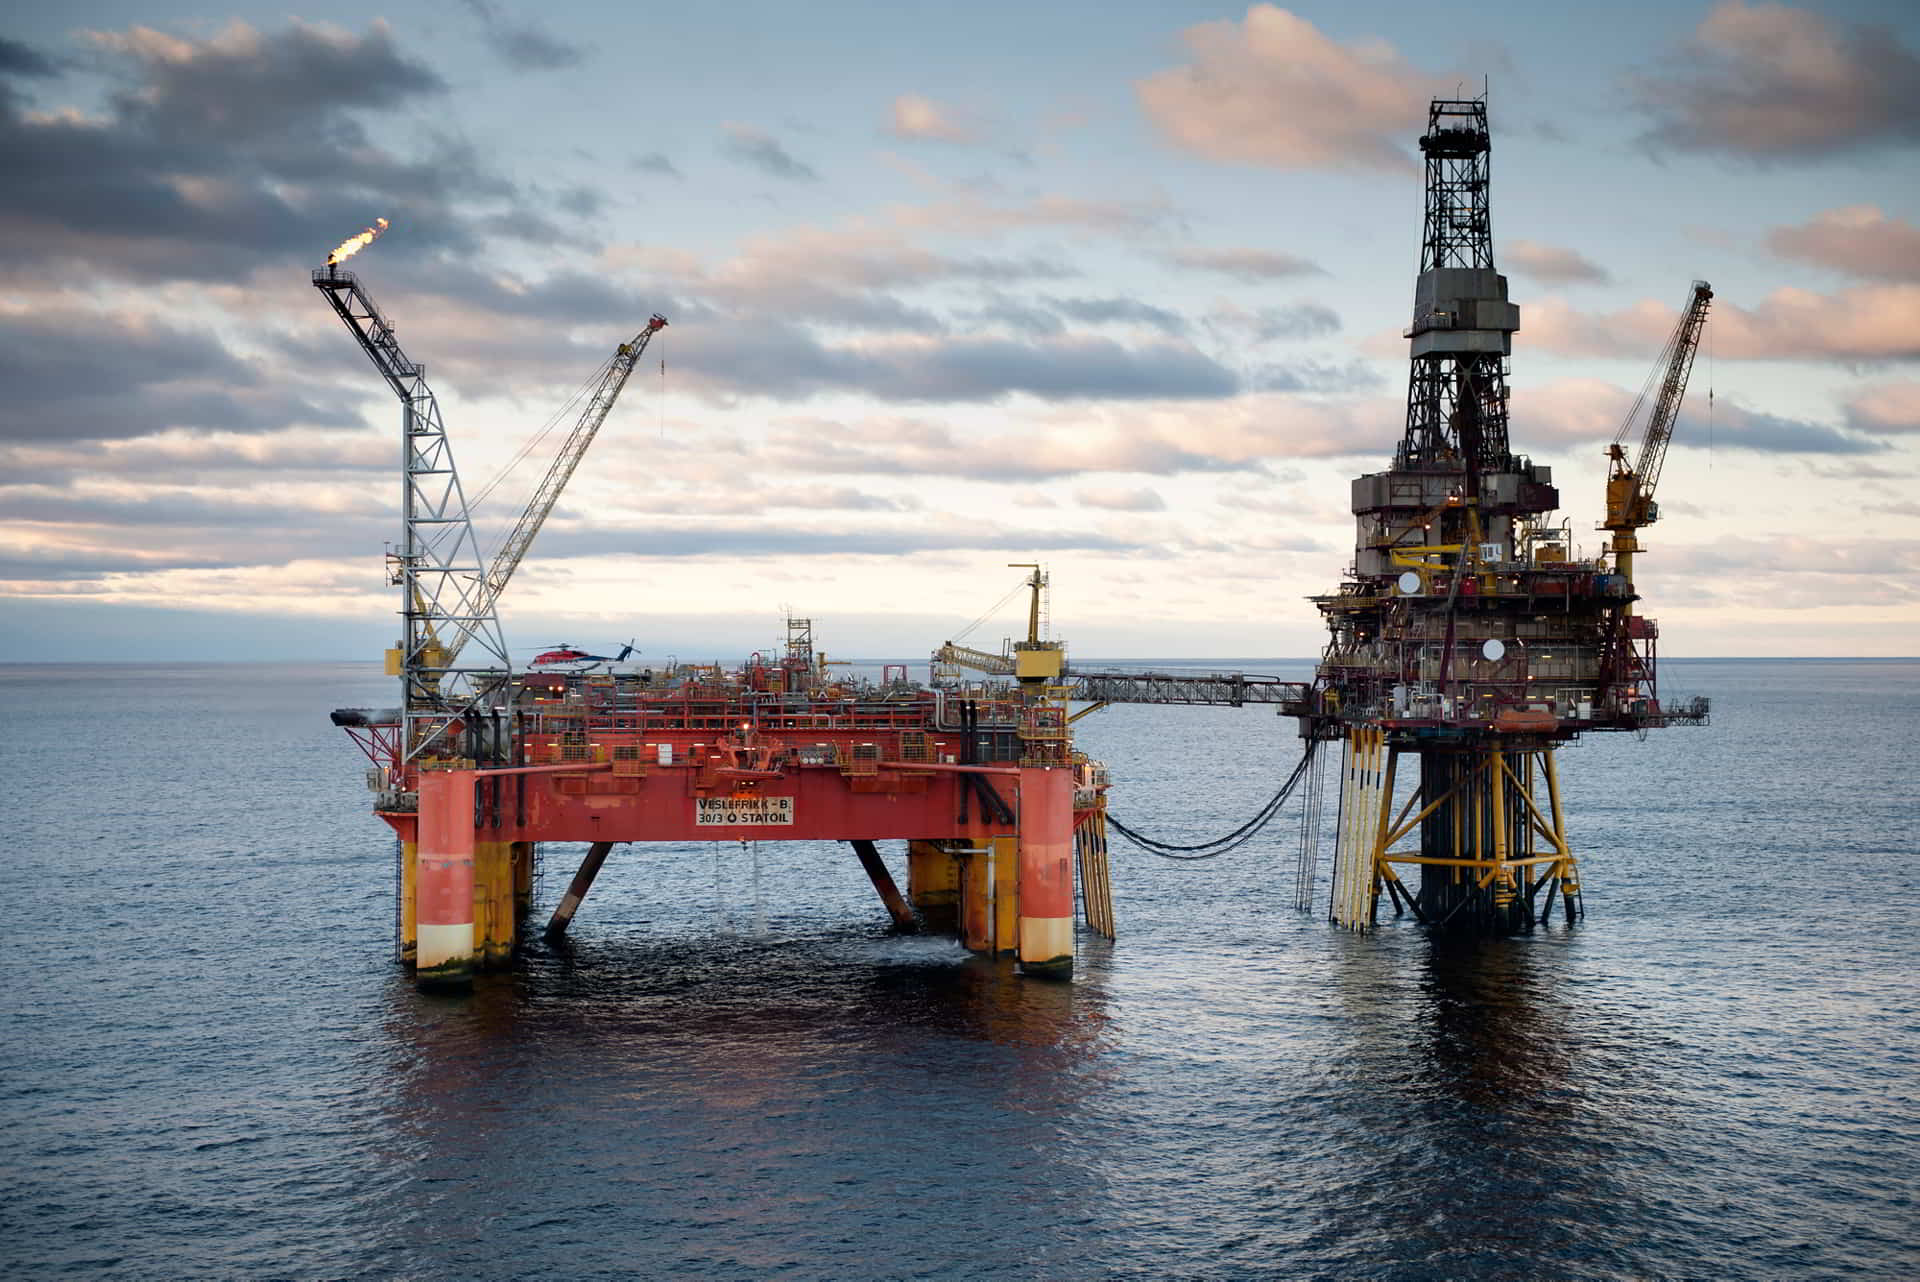 Equinor closes Veslefrikk chapter in readiness for decom ops